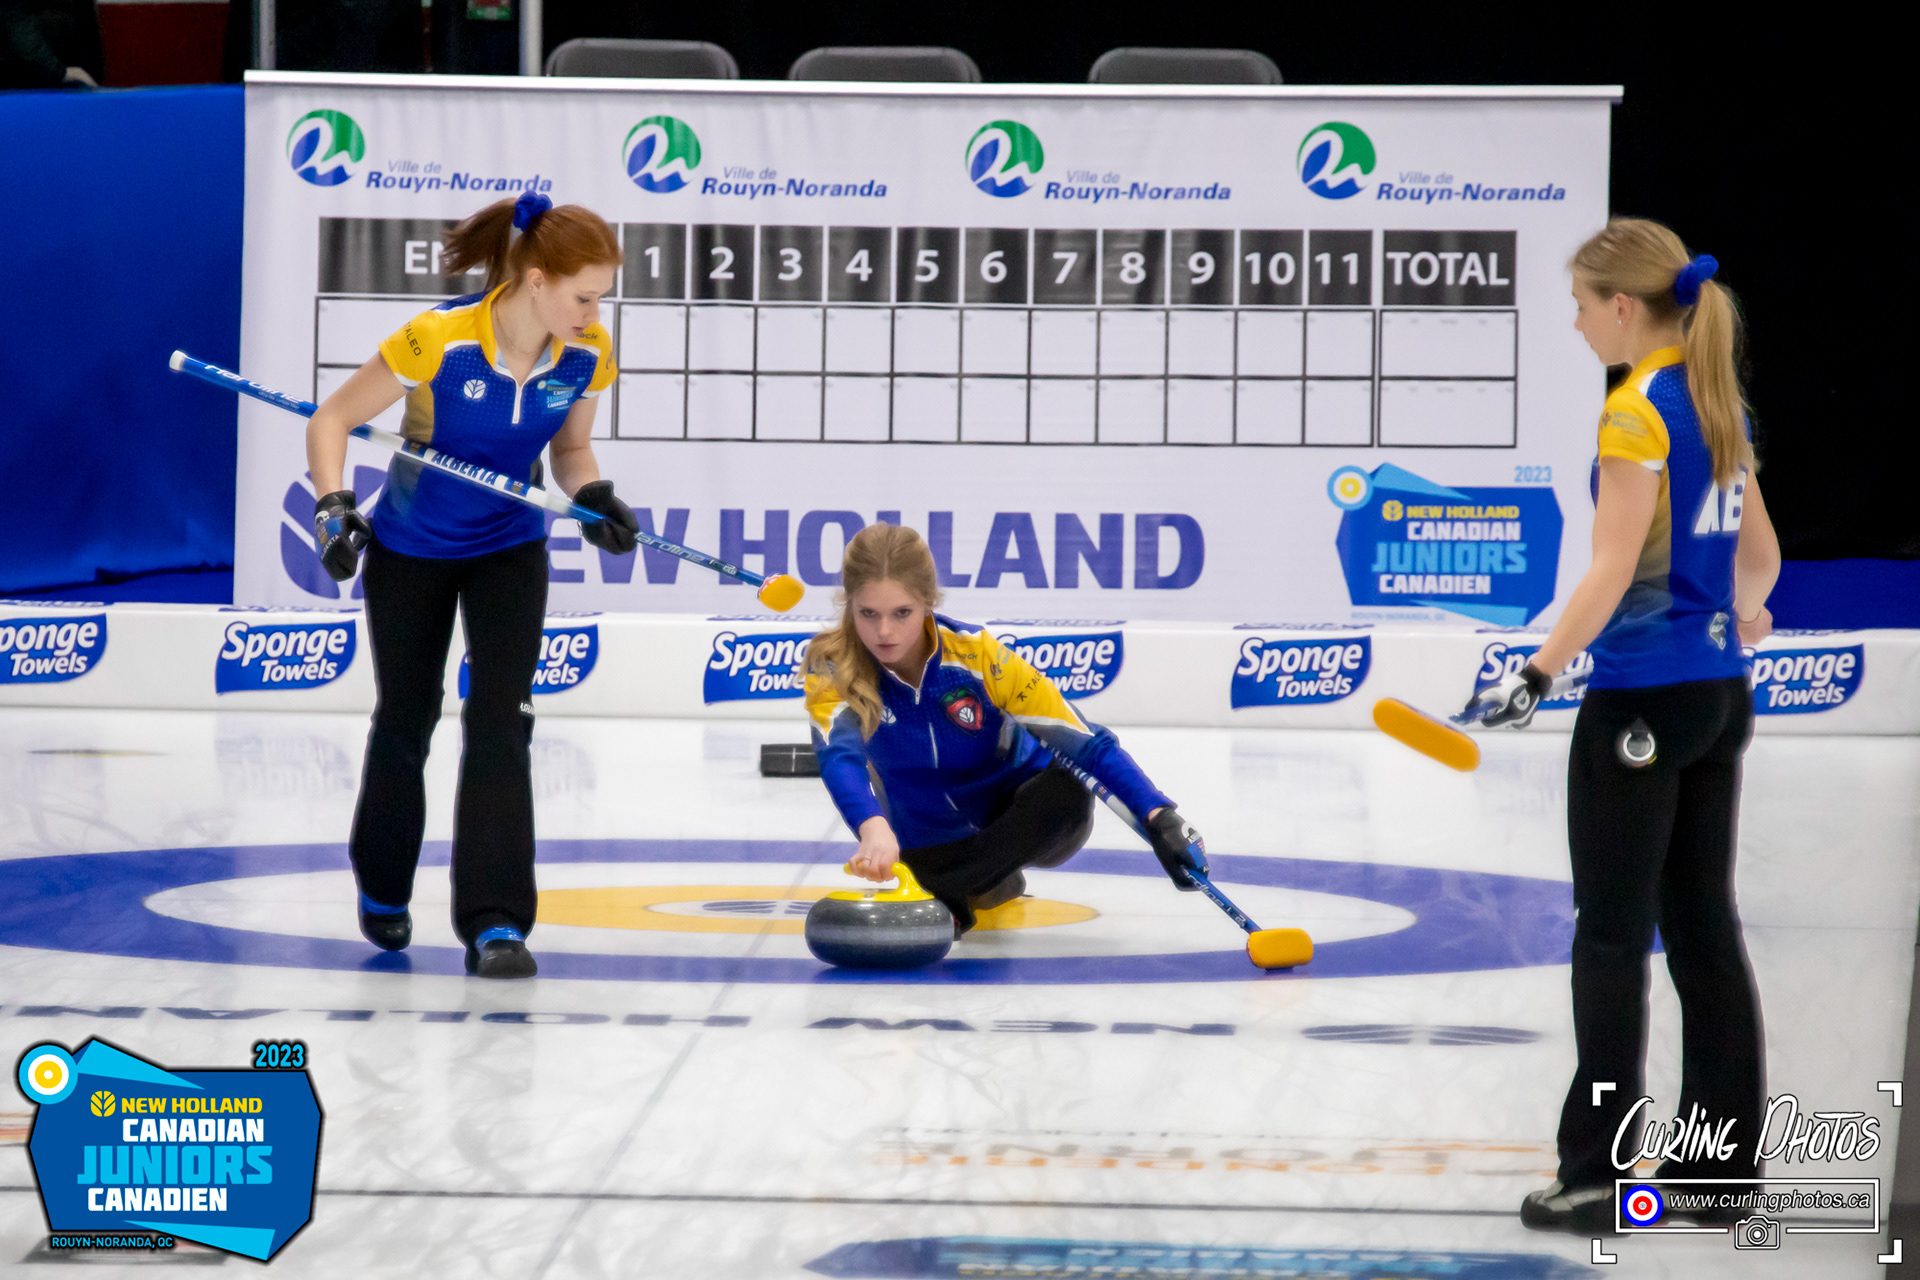 New Holland Canadian Junior Curling Championships - SWSCD